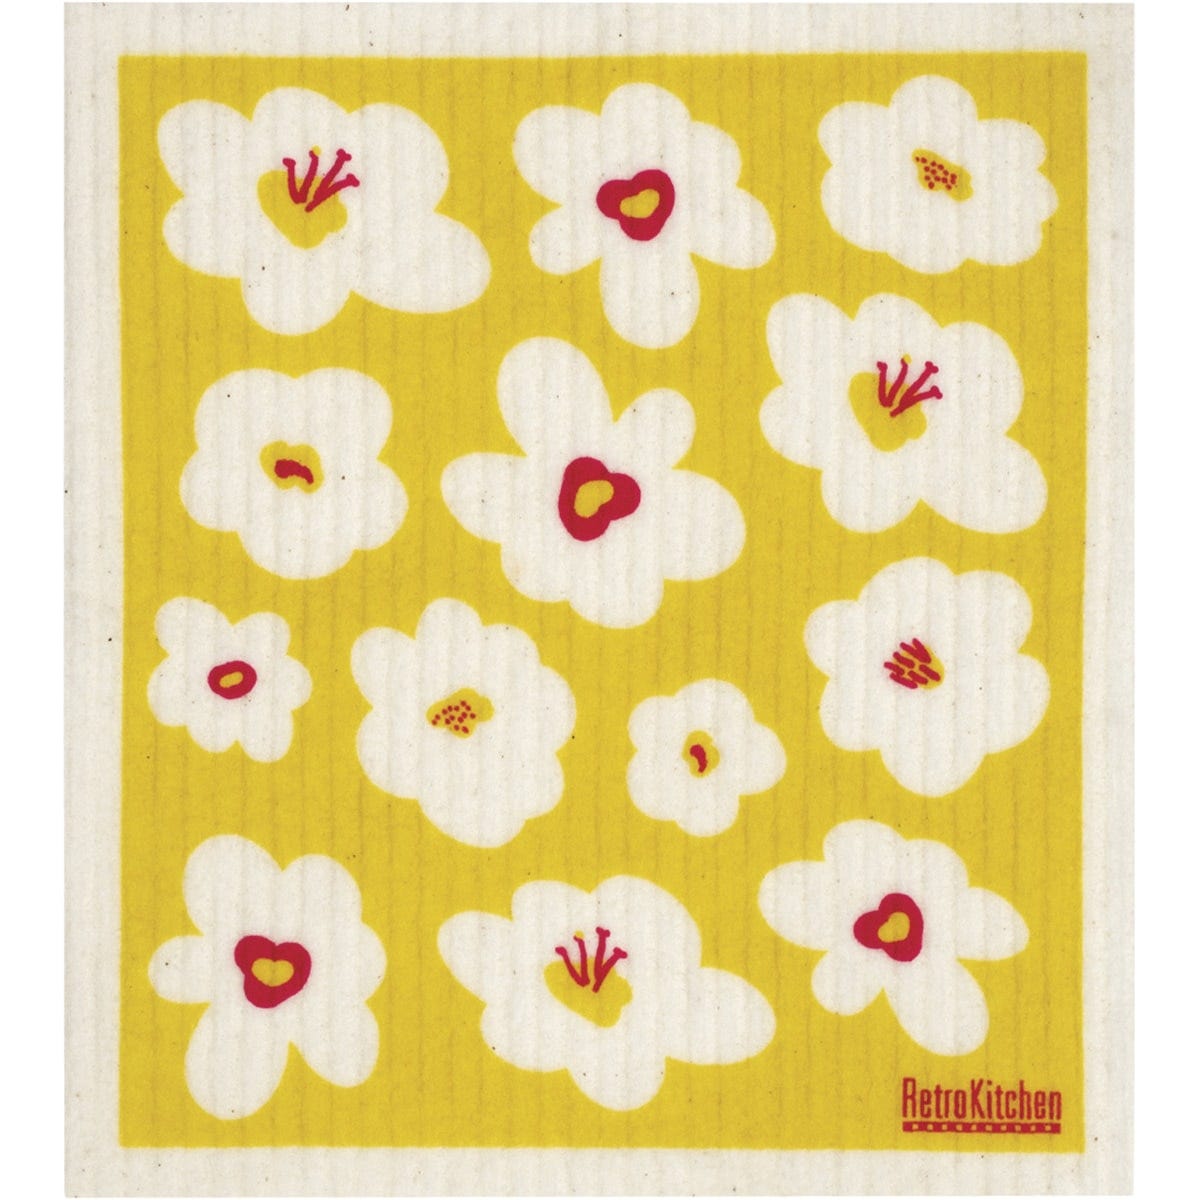 Retrokitchen 100% Compostable Sponge Cloth Retro Flowers - Dr Earth - Cleaning